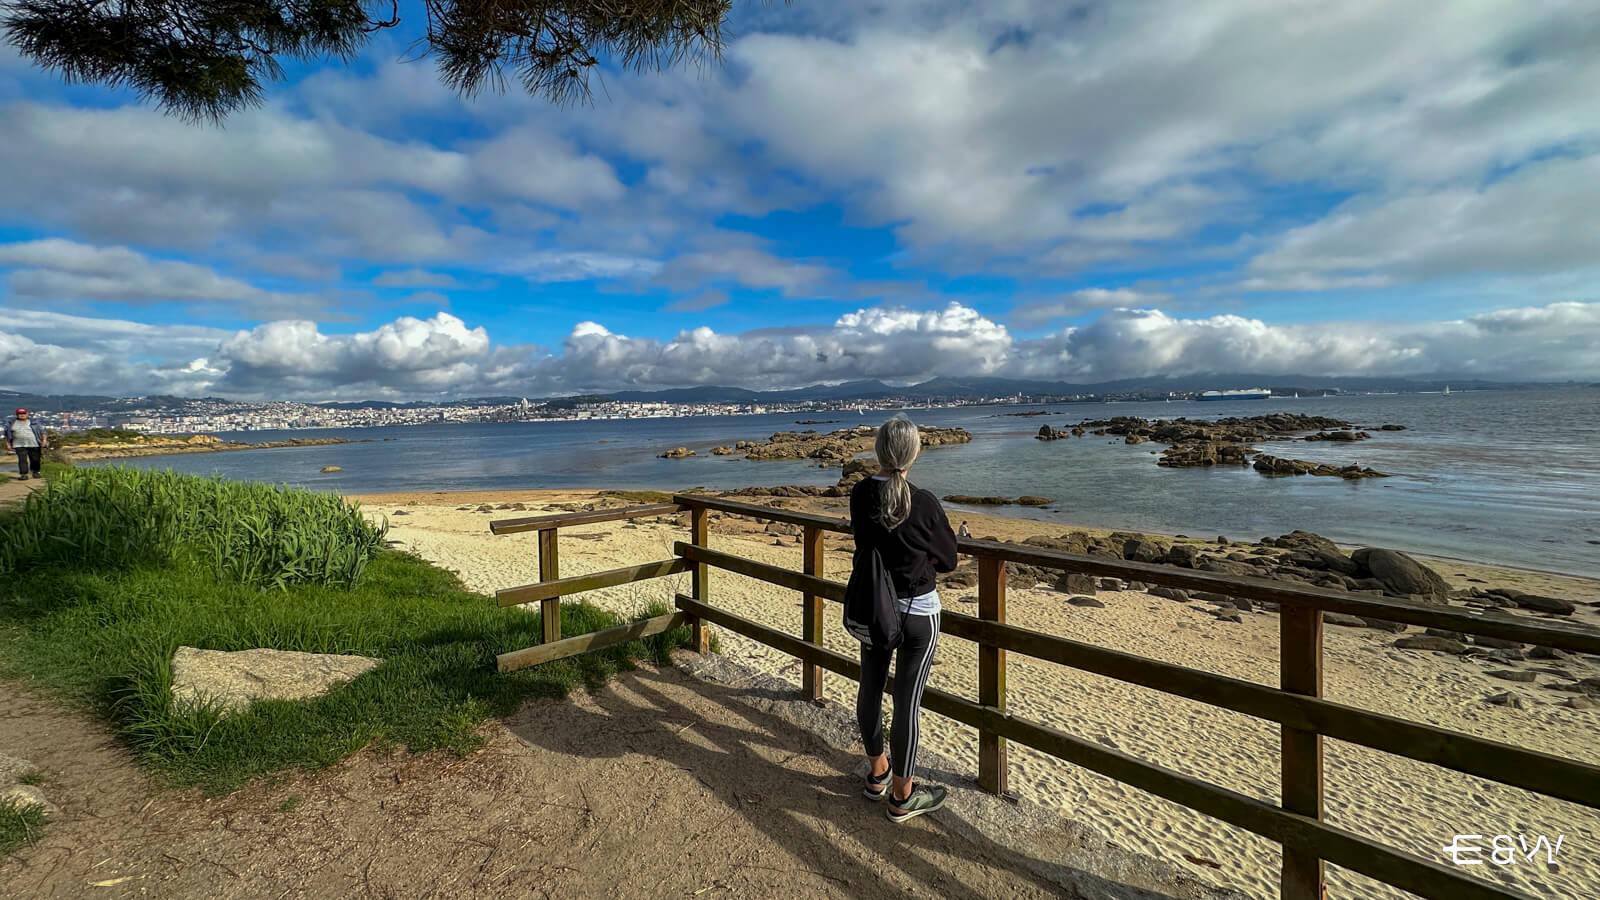 What to do in Galicia? Our top plans - Exploring Cangas do Morrazo and more